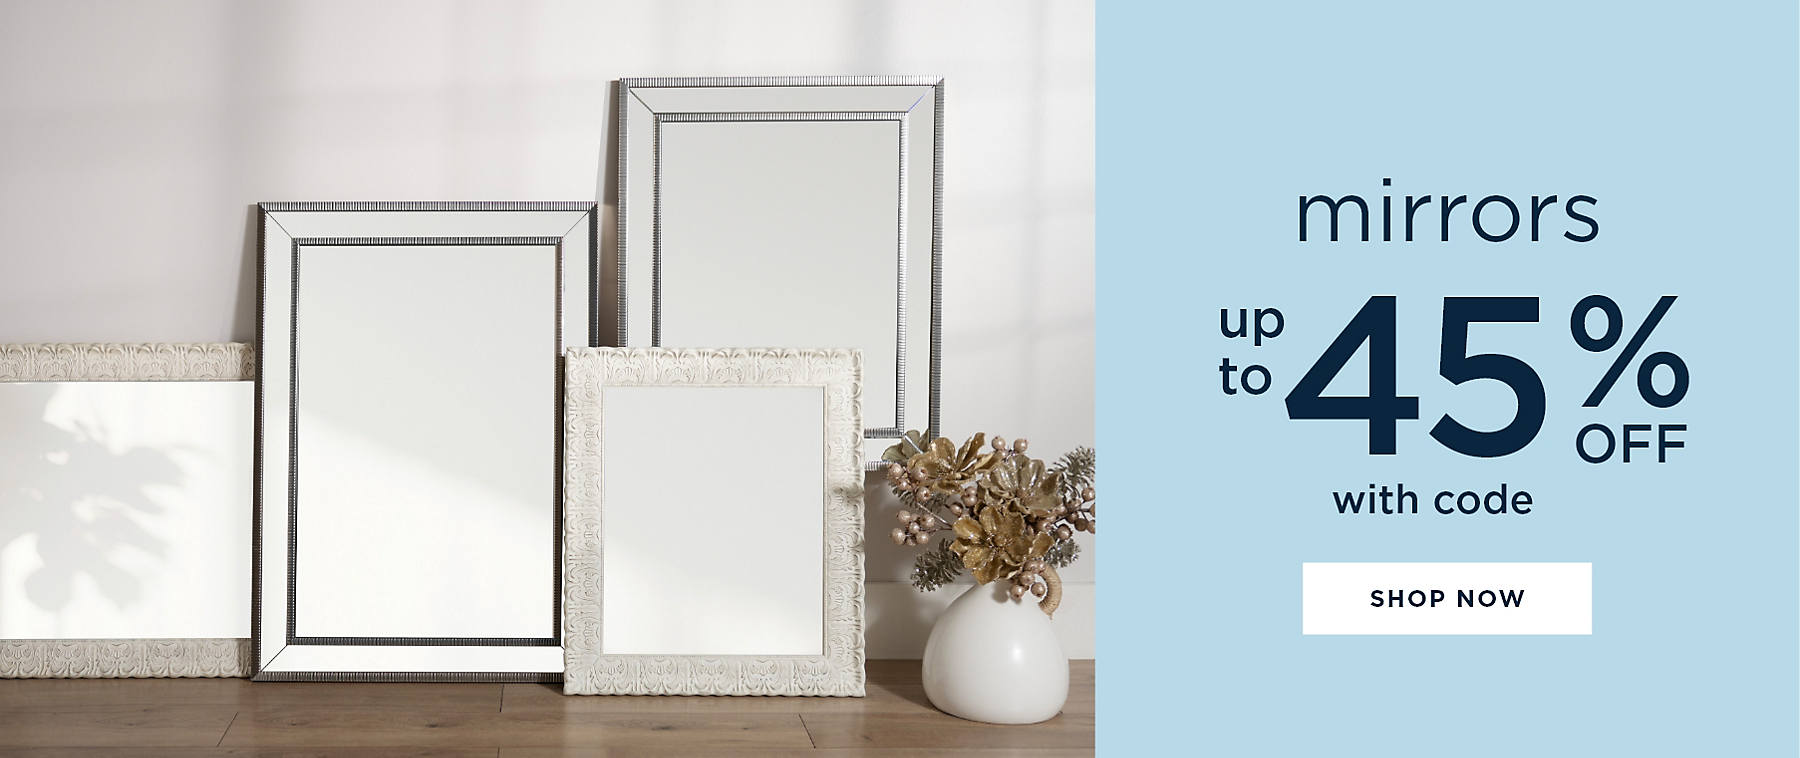 mirrors up to 45% off with code shop now